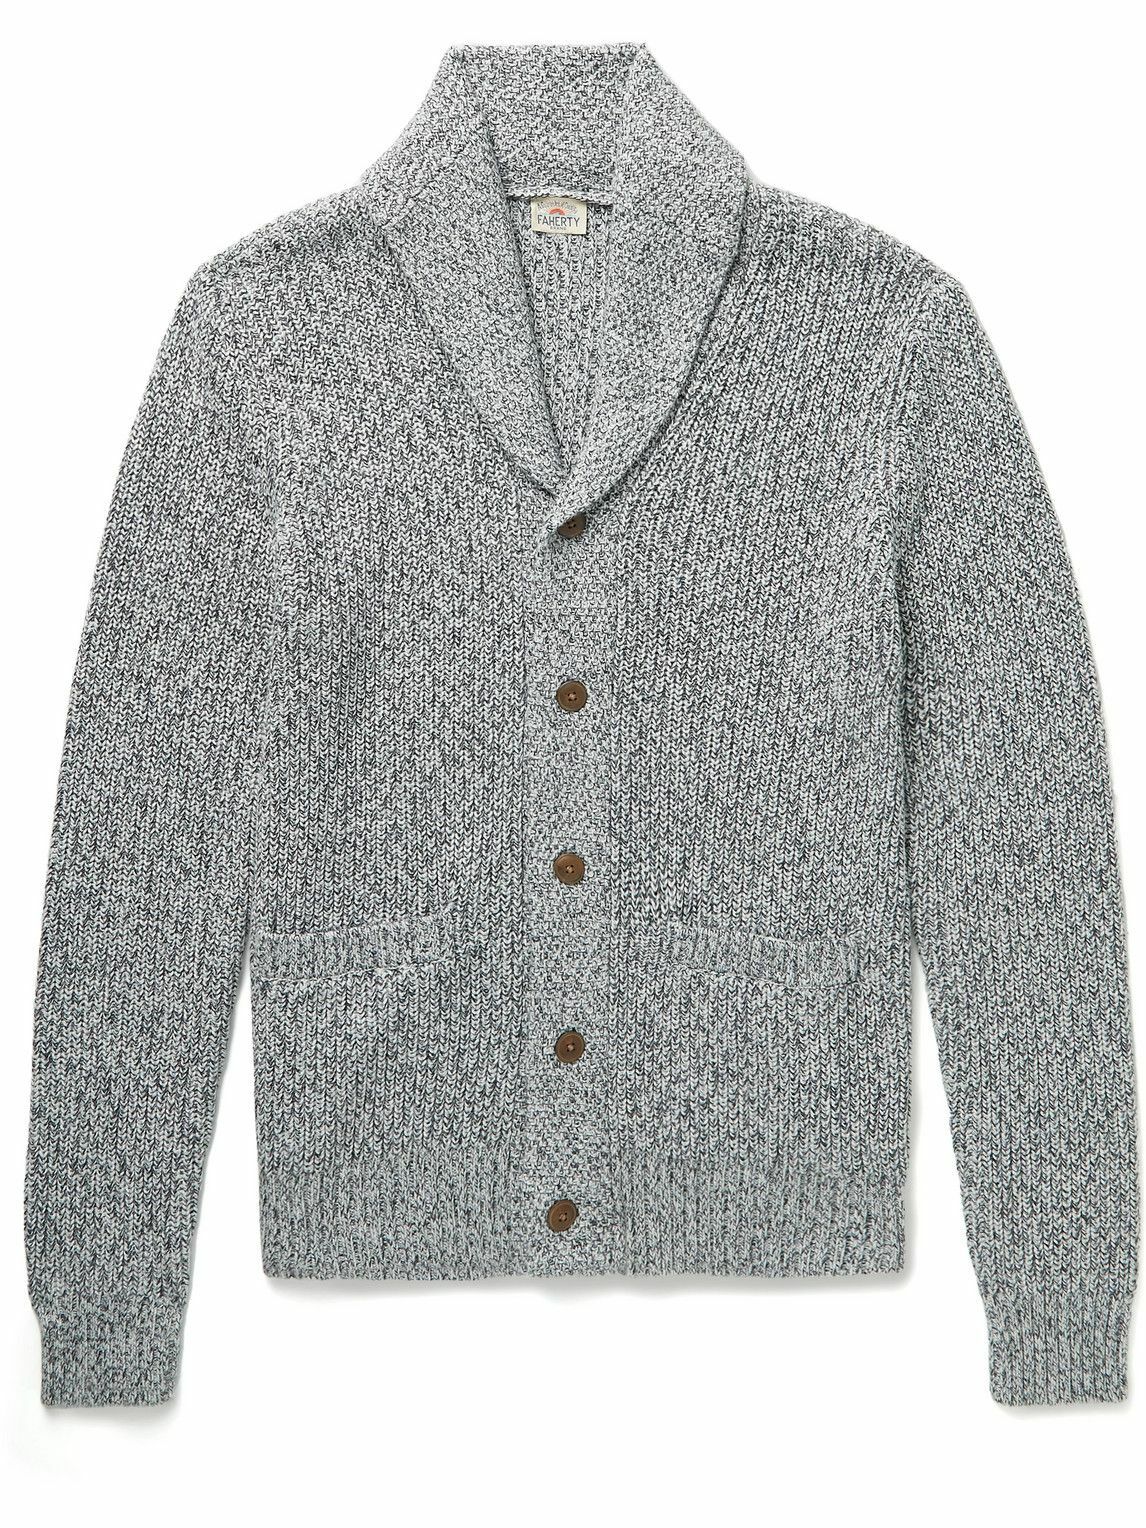 Faherty - Shawl-Collar Cotton and Cashmere-Blend Cardigan - Gray Faherty